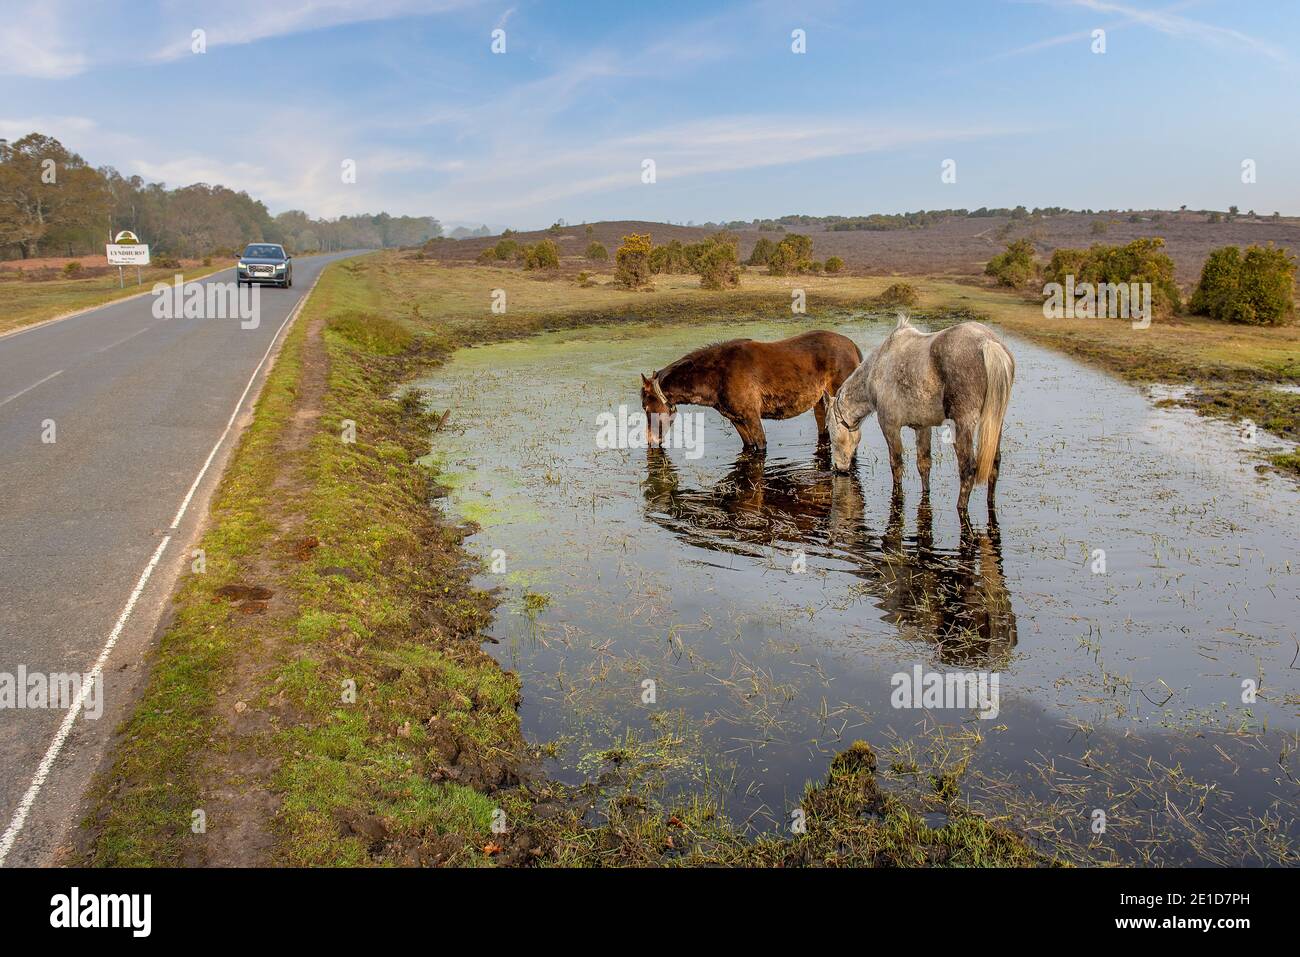 Beaulieu, Hampshire, UK - A car drives past New Forest donkeys and ponies that wander freely in the New Forest. A sight not seen anywhere else in the Stock Photo